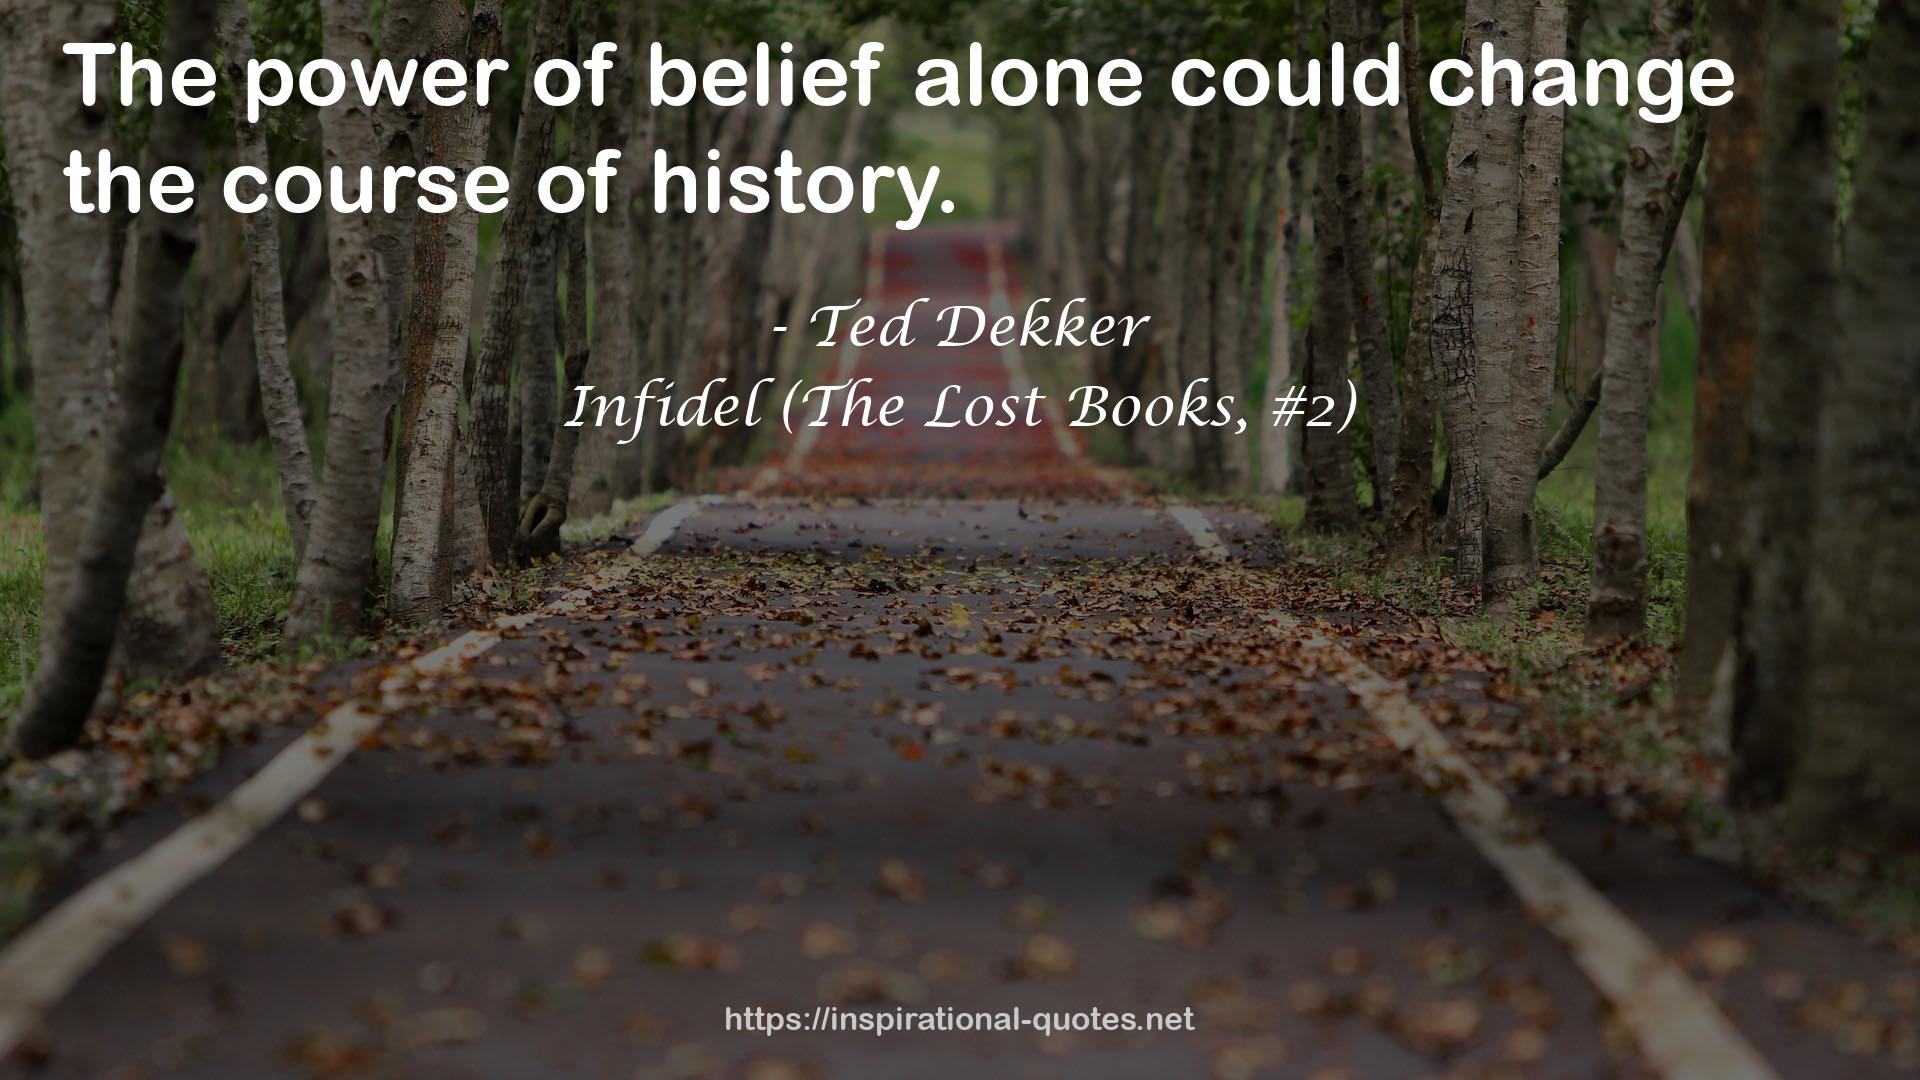 Infidel (The Lost Books, #2) QUOTES